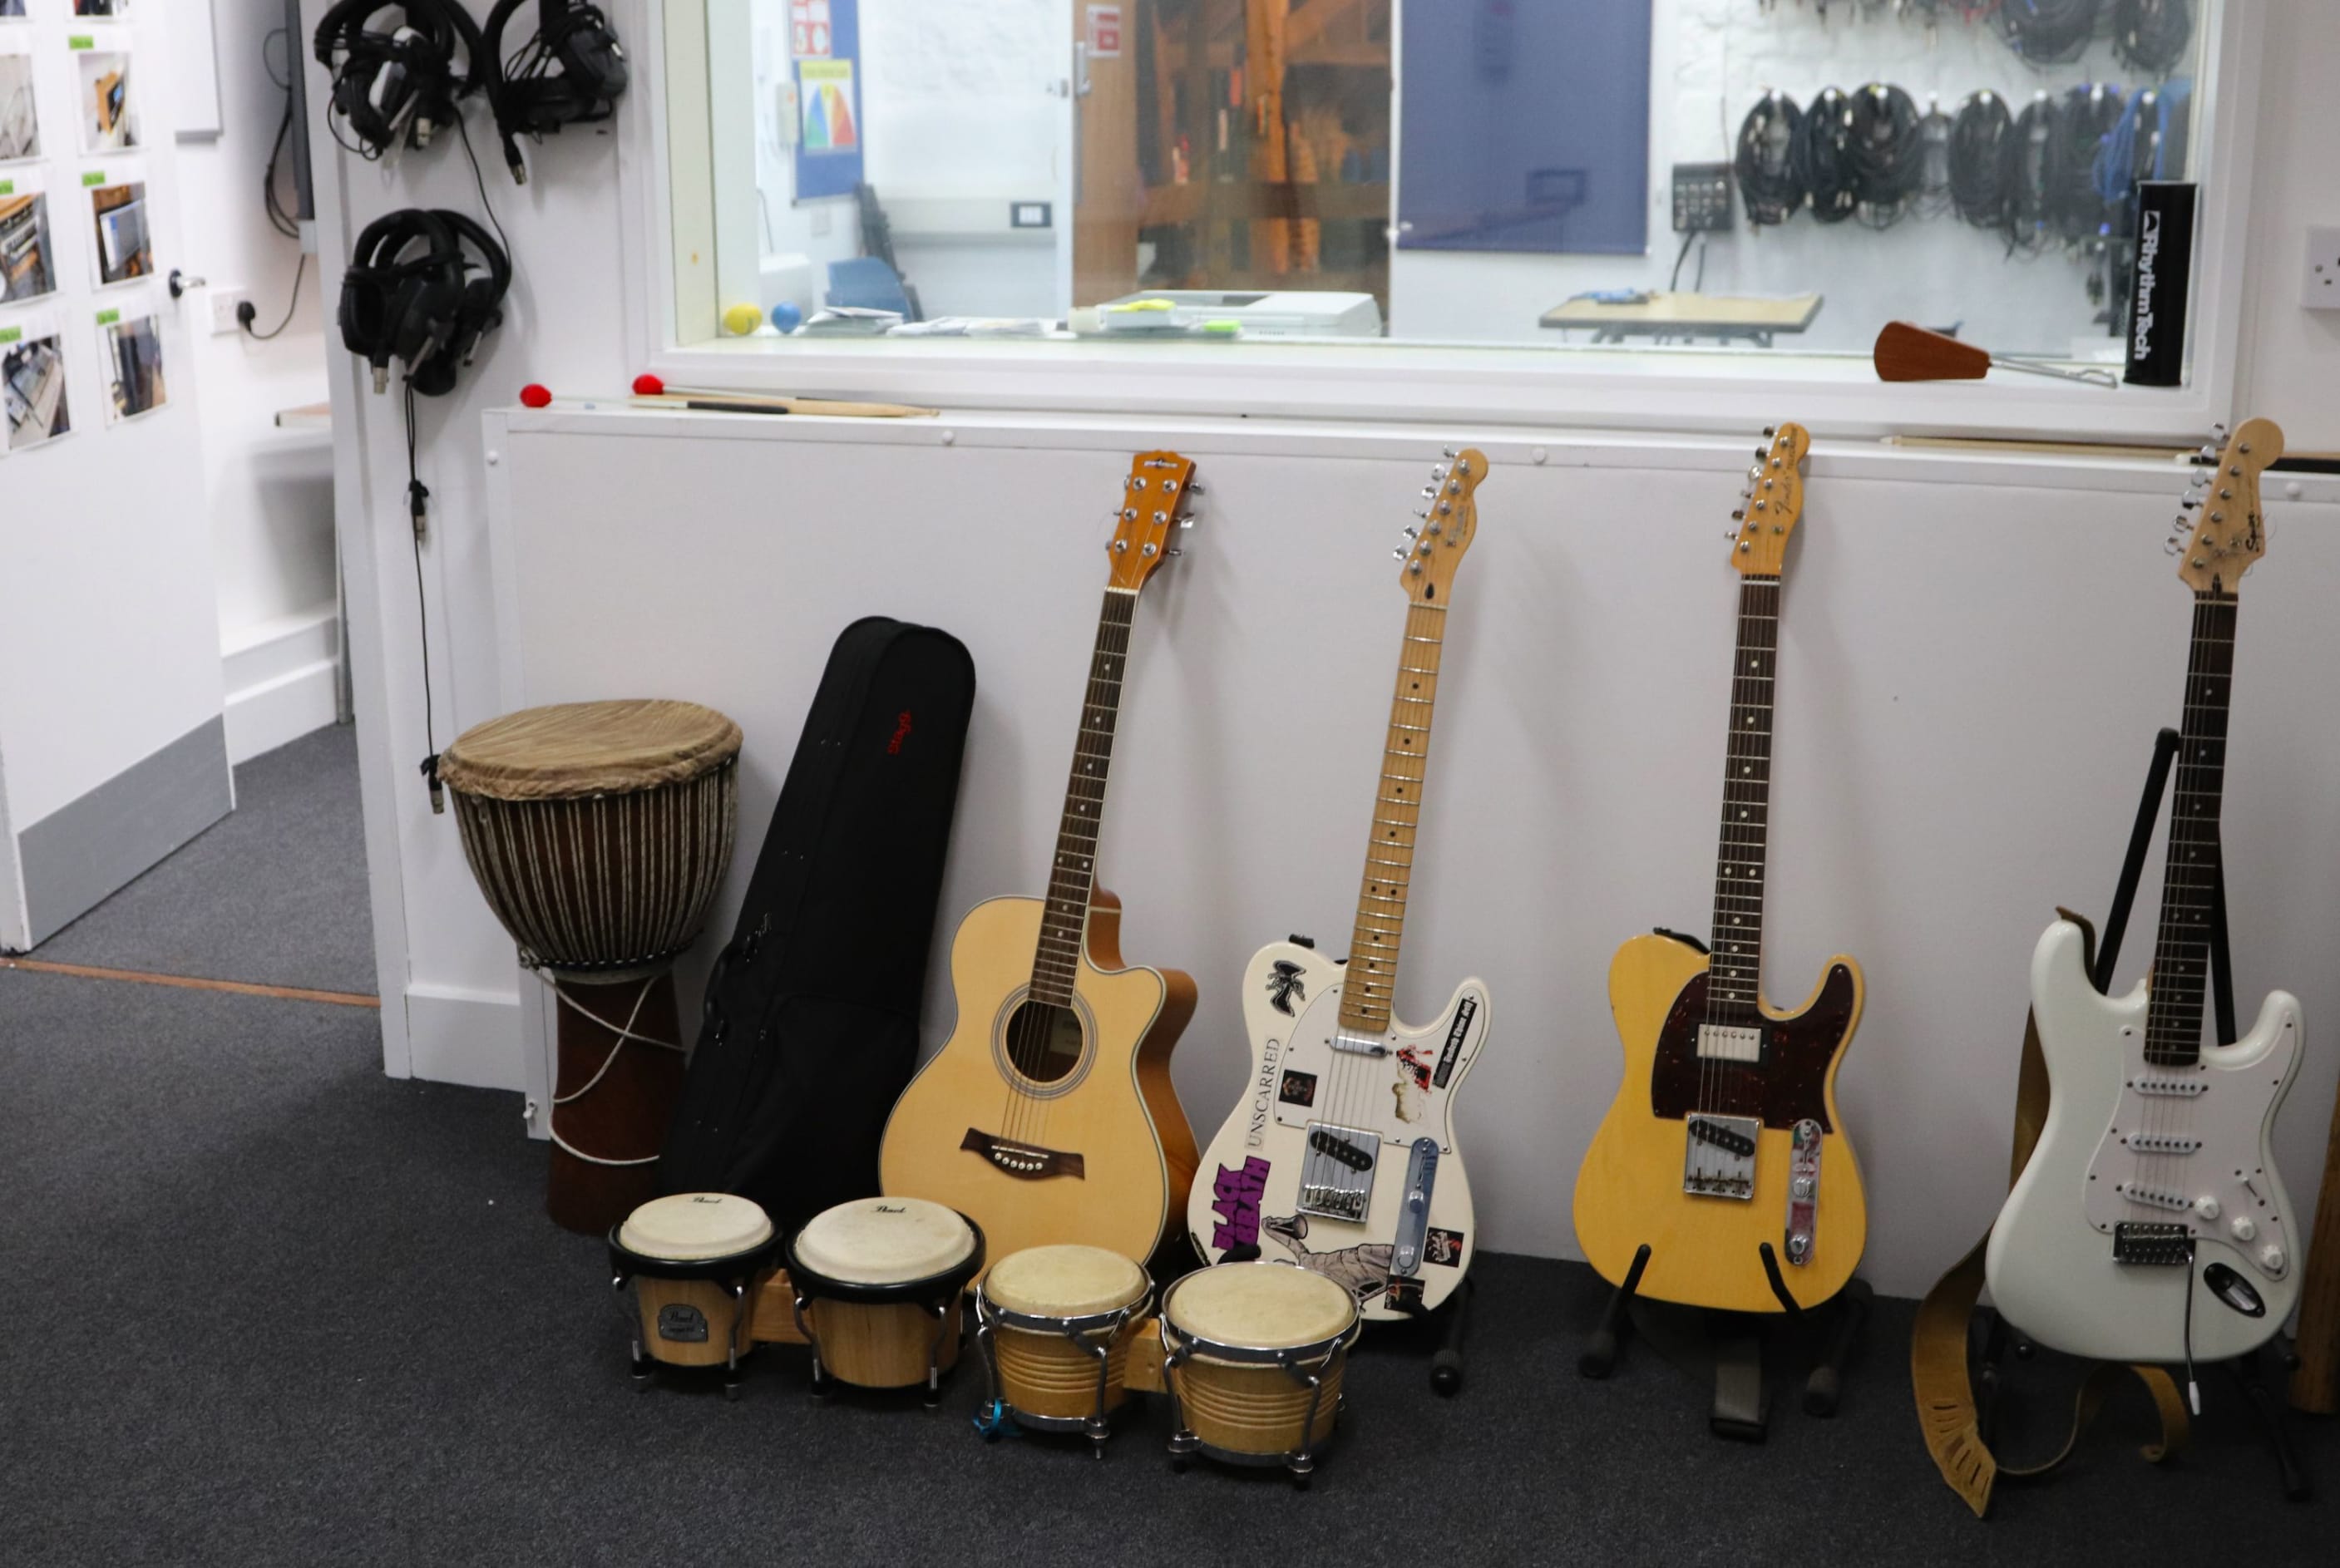 The recording studio at the Orpheus cenre in Godstone, Surrey. Four guitars are on stands agaist a wall, There are bongos on the floor in front. There are headphones and leads on hooks on the wall.